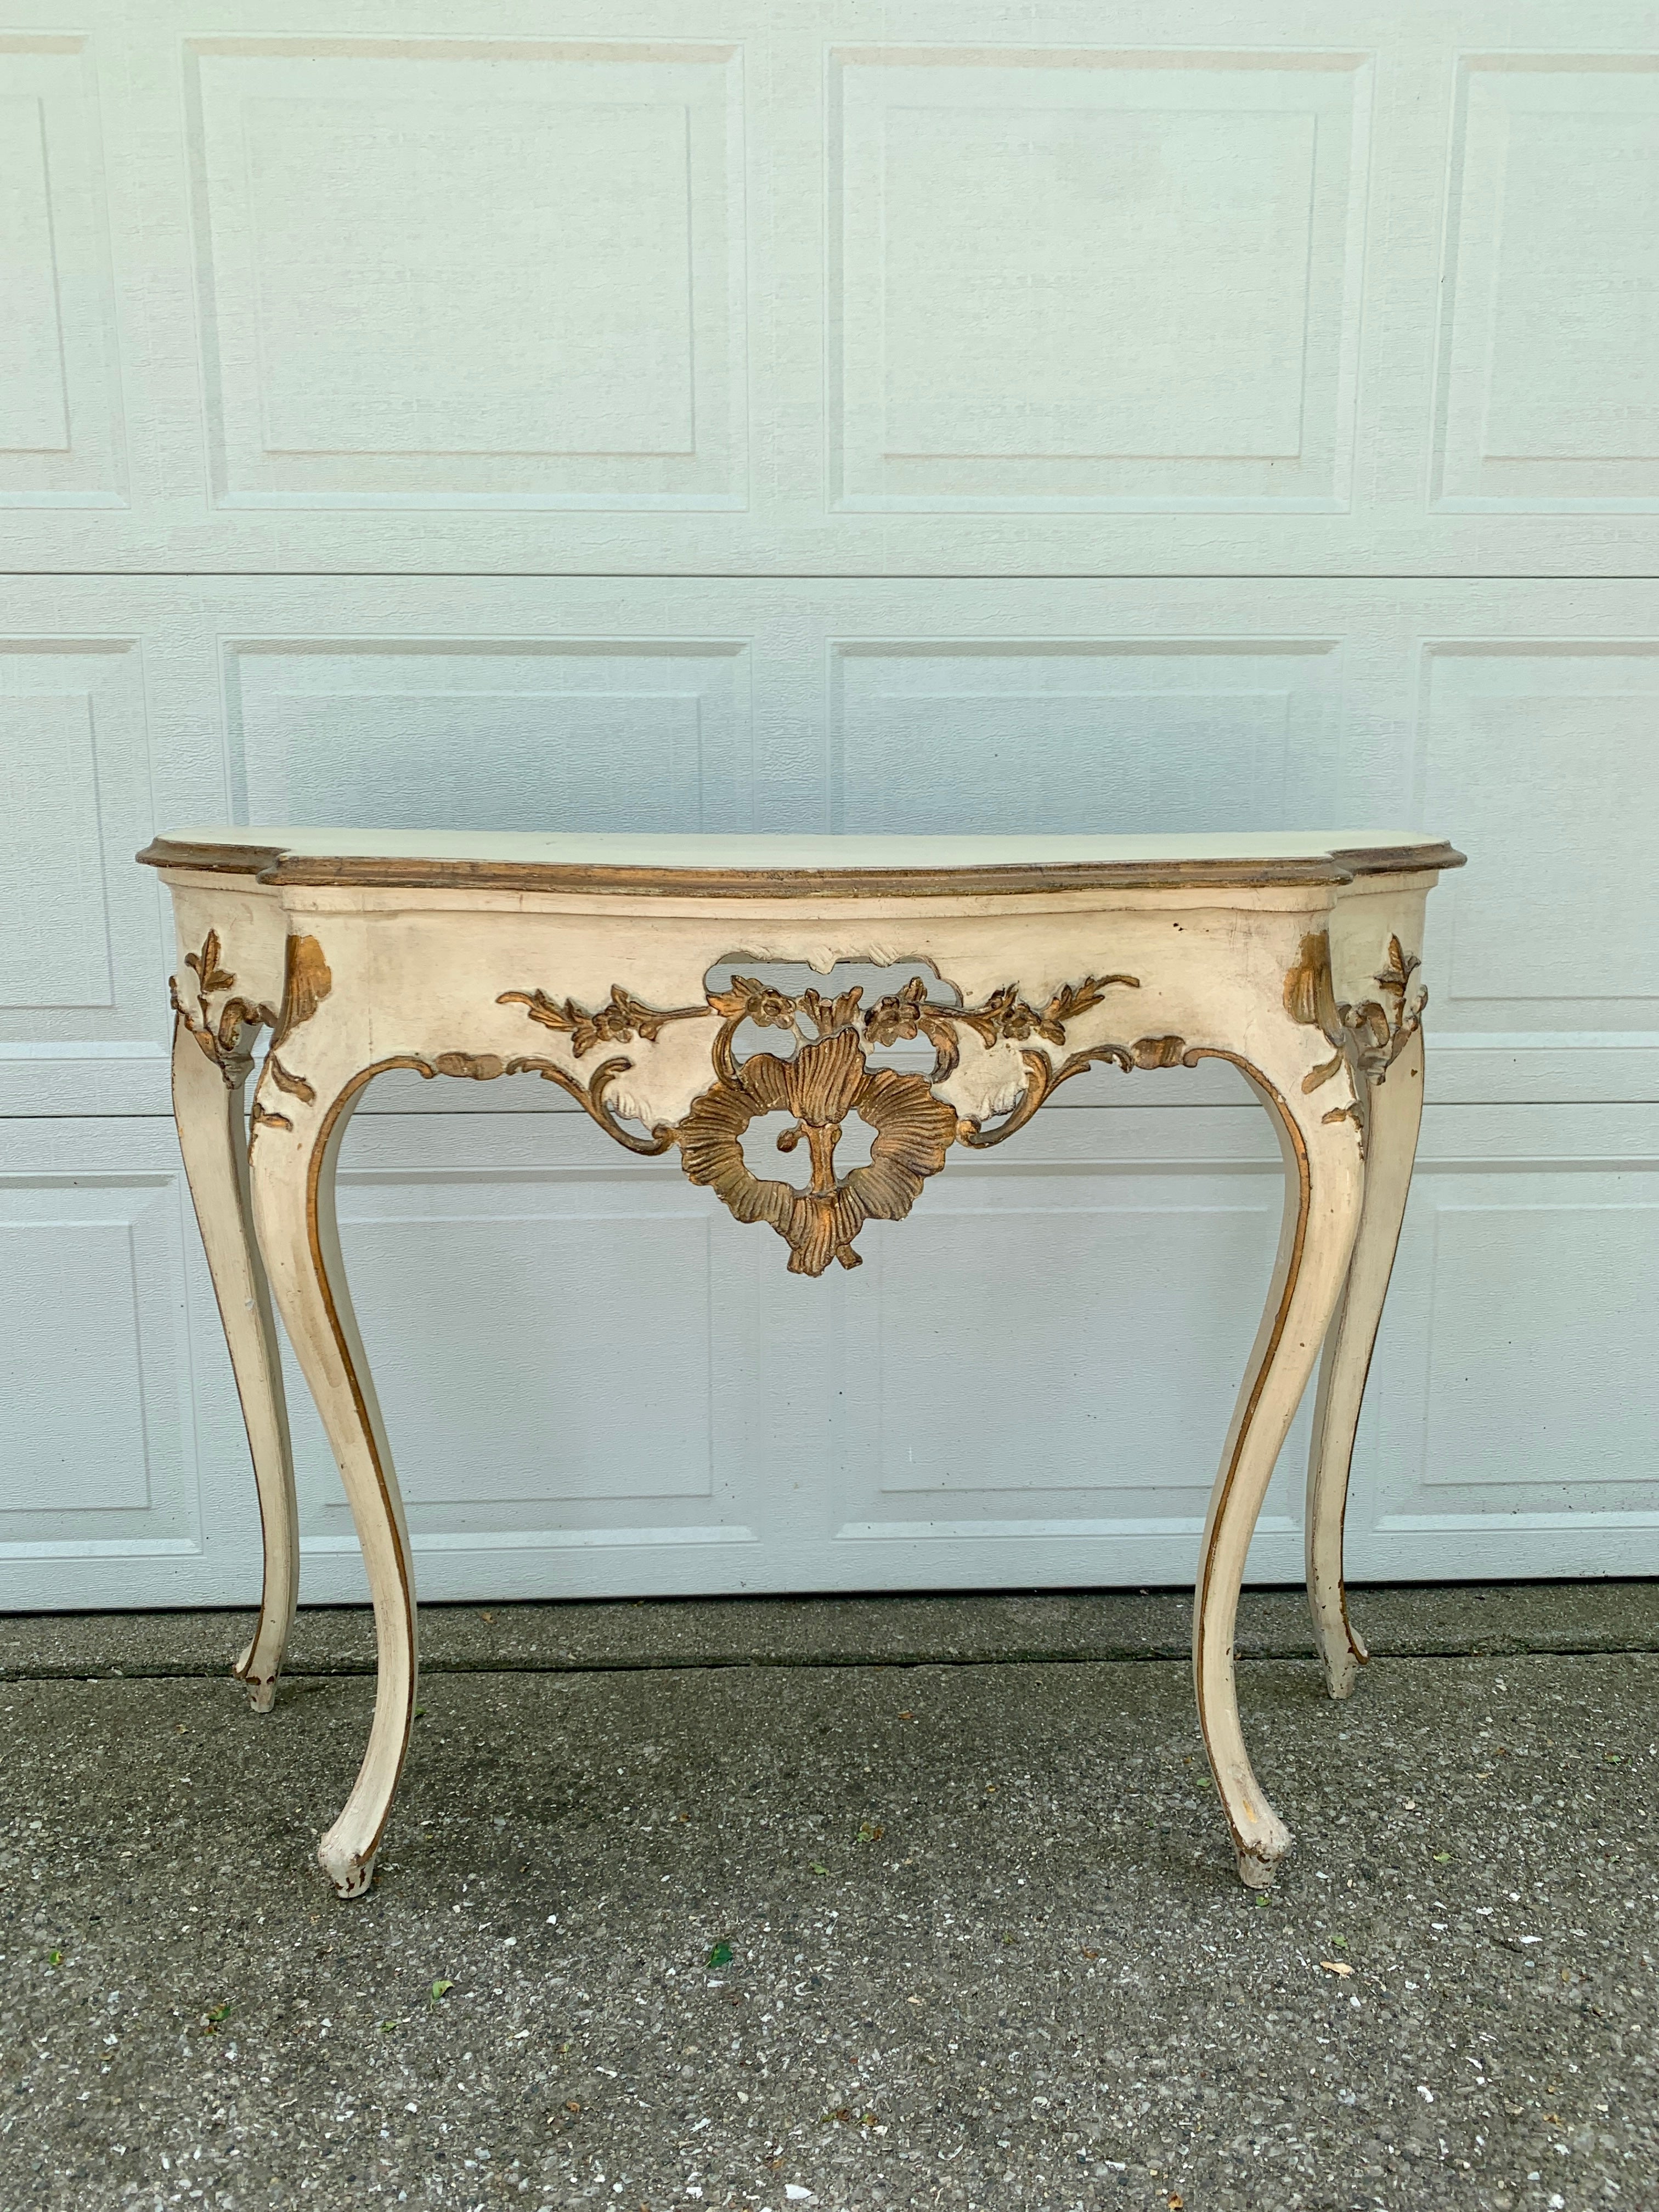 A gorgeous antique French Provincial Louis XV style console table

France, Early 20th century

Painted wood in a lovely antique cream color, with mounted gold gilt painted details, and a custom made glass top.

Measures: 43.75?W x 16.63?D x